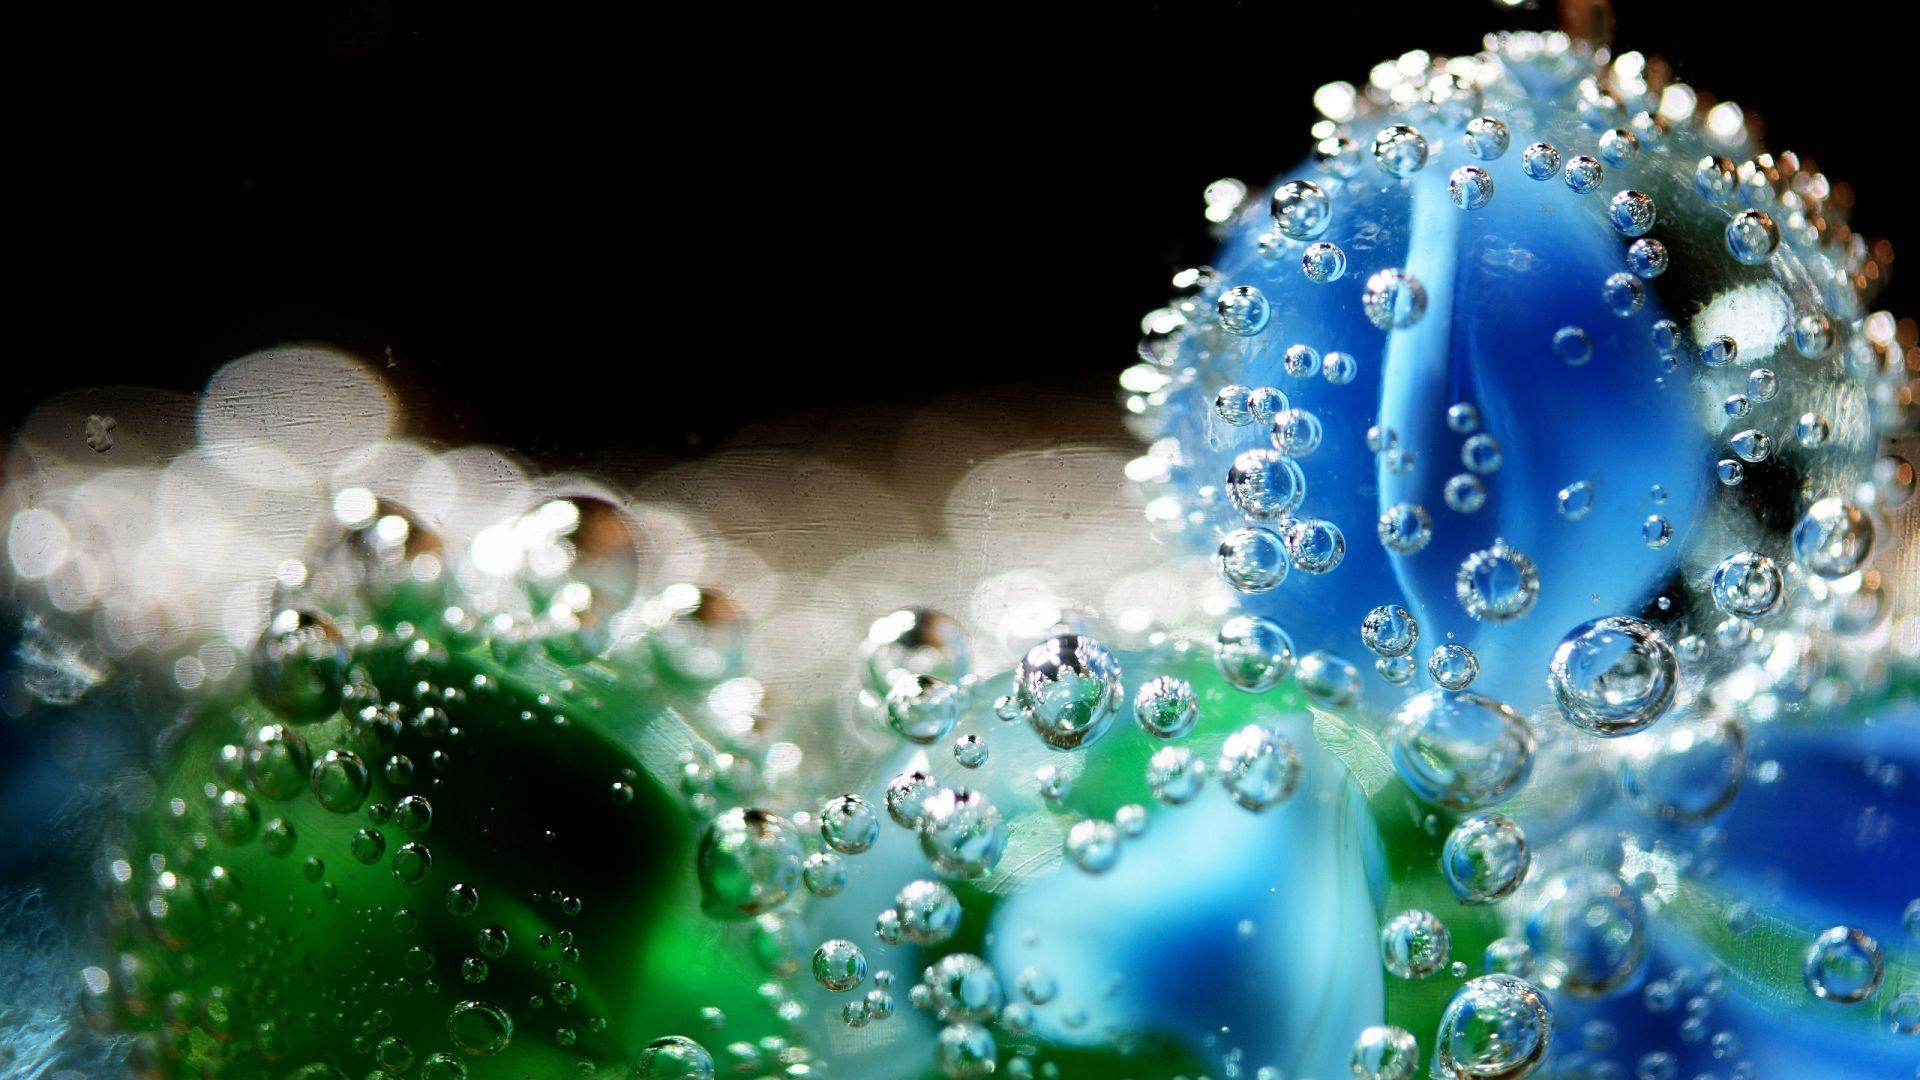 Water Drop Wallpaper for PC. Full HD Picture